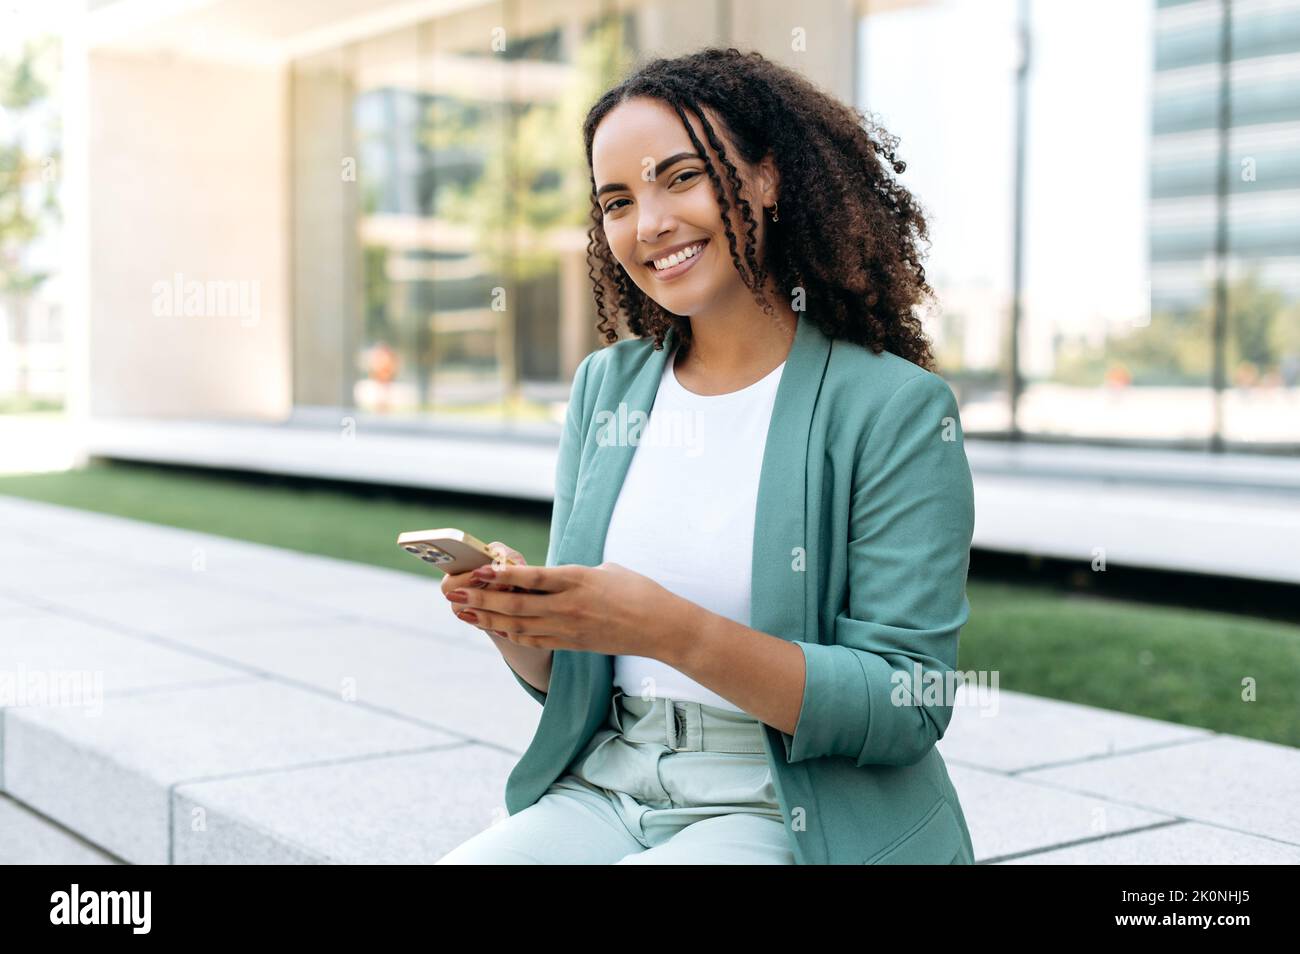 Lovely young brazilian or latino business woman, wearing elegant suit, holding cell phone sitting outdoors, using gadget for online messaging, checking email, browsing websites, look at camera, smiles Stock Photo